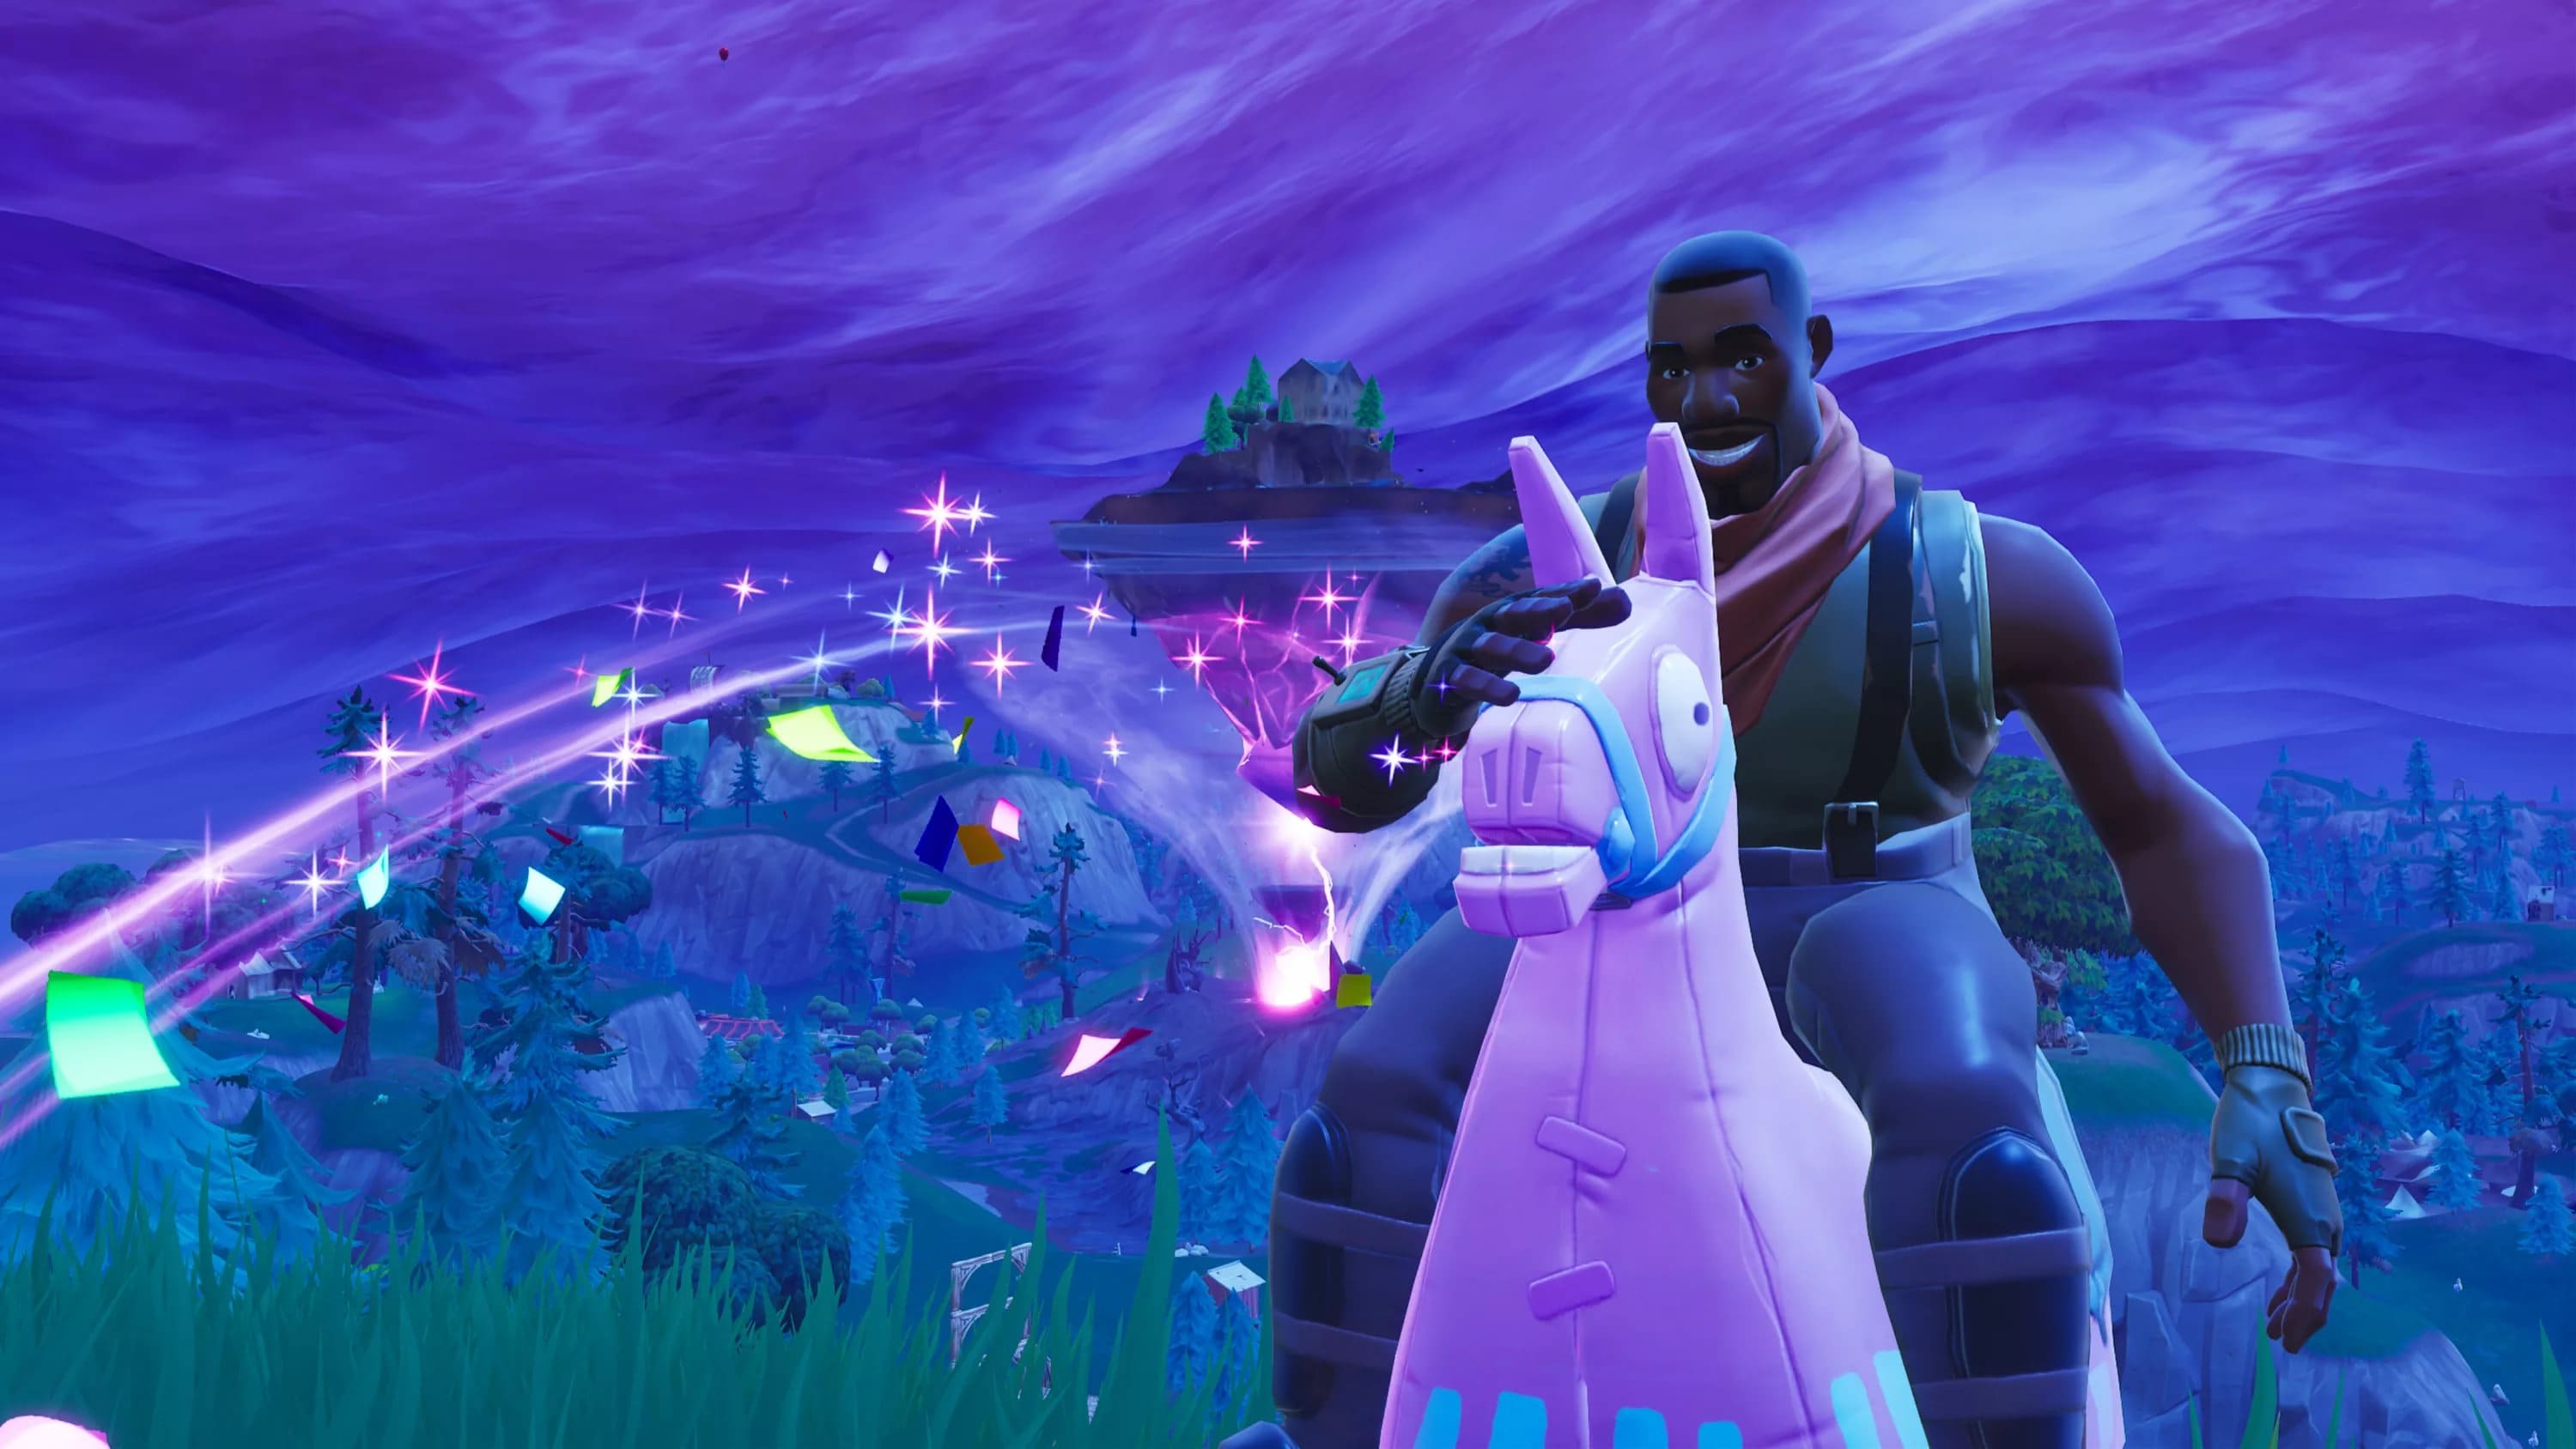 The coolest pictures and wallpapers for desktop Fortnite. 